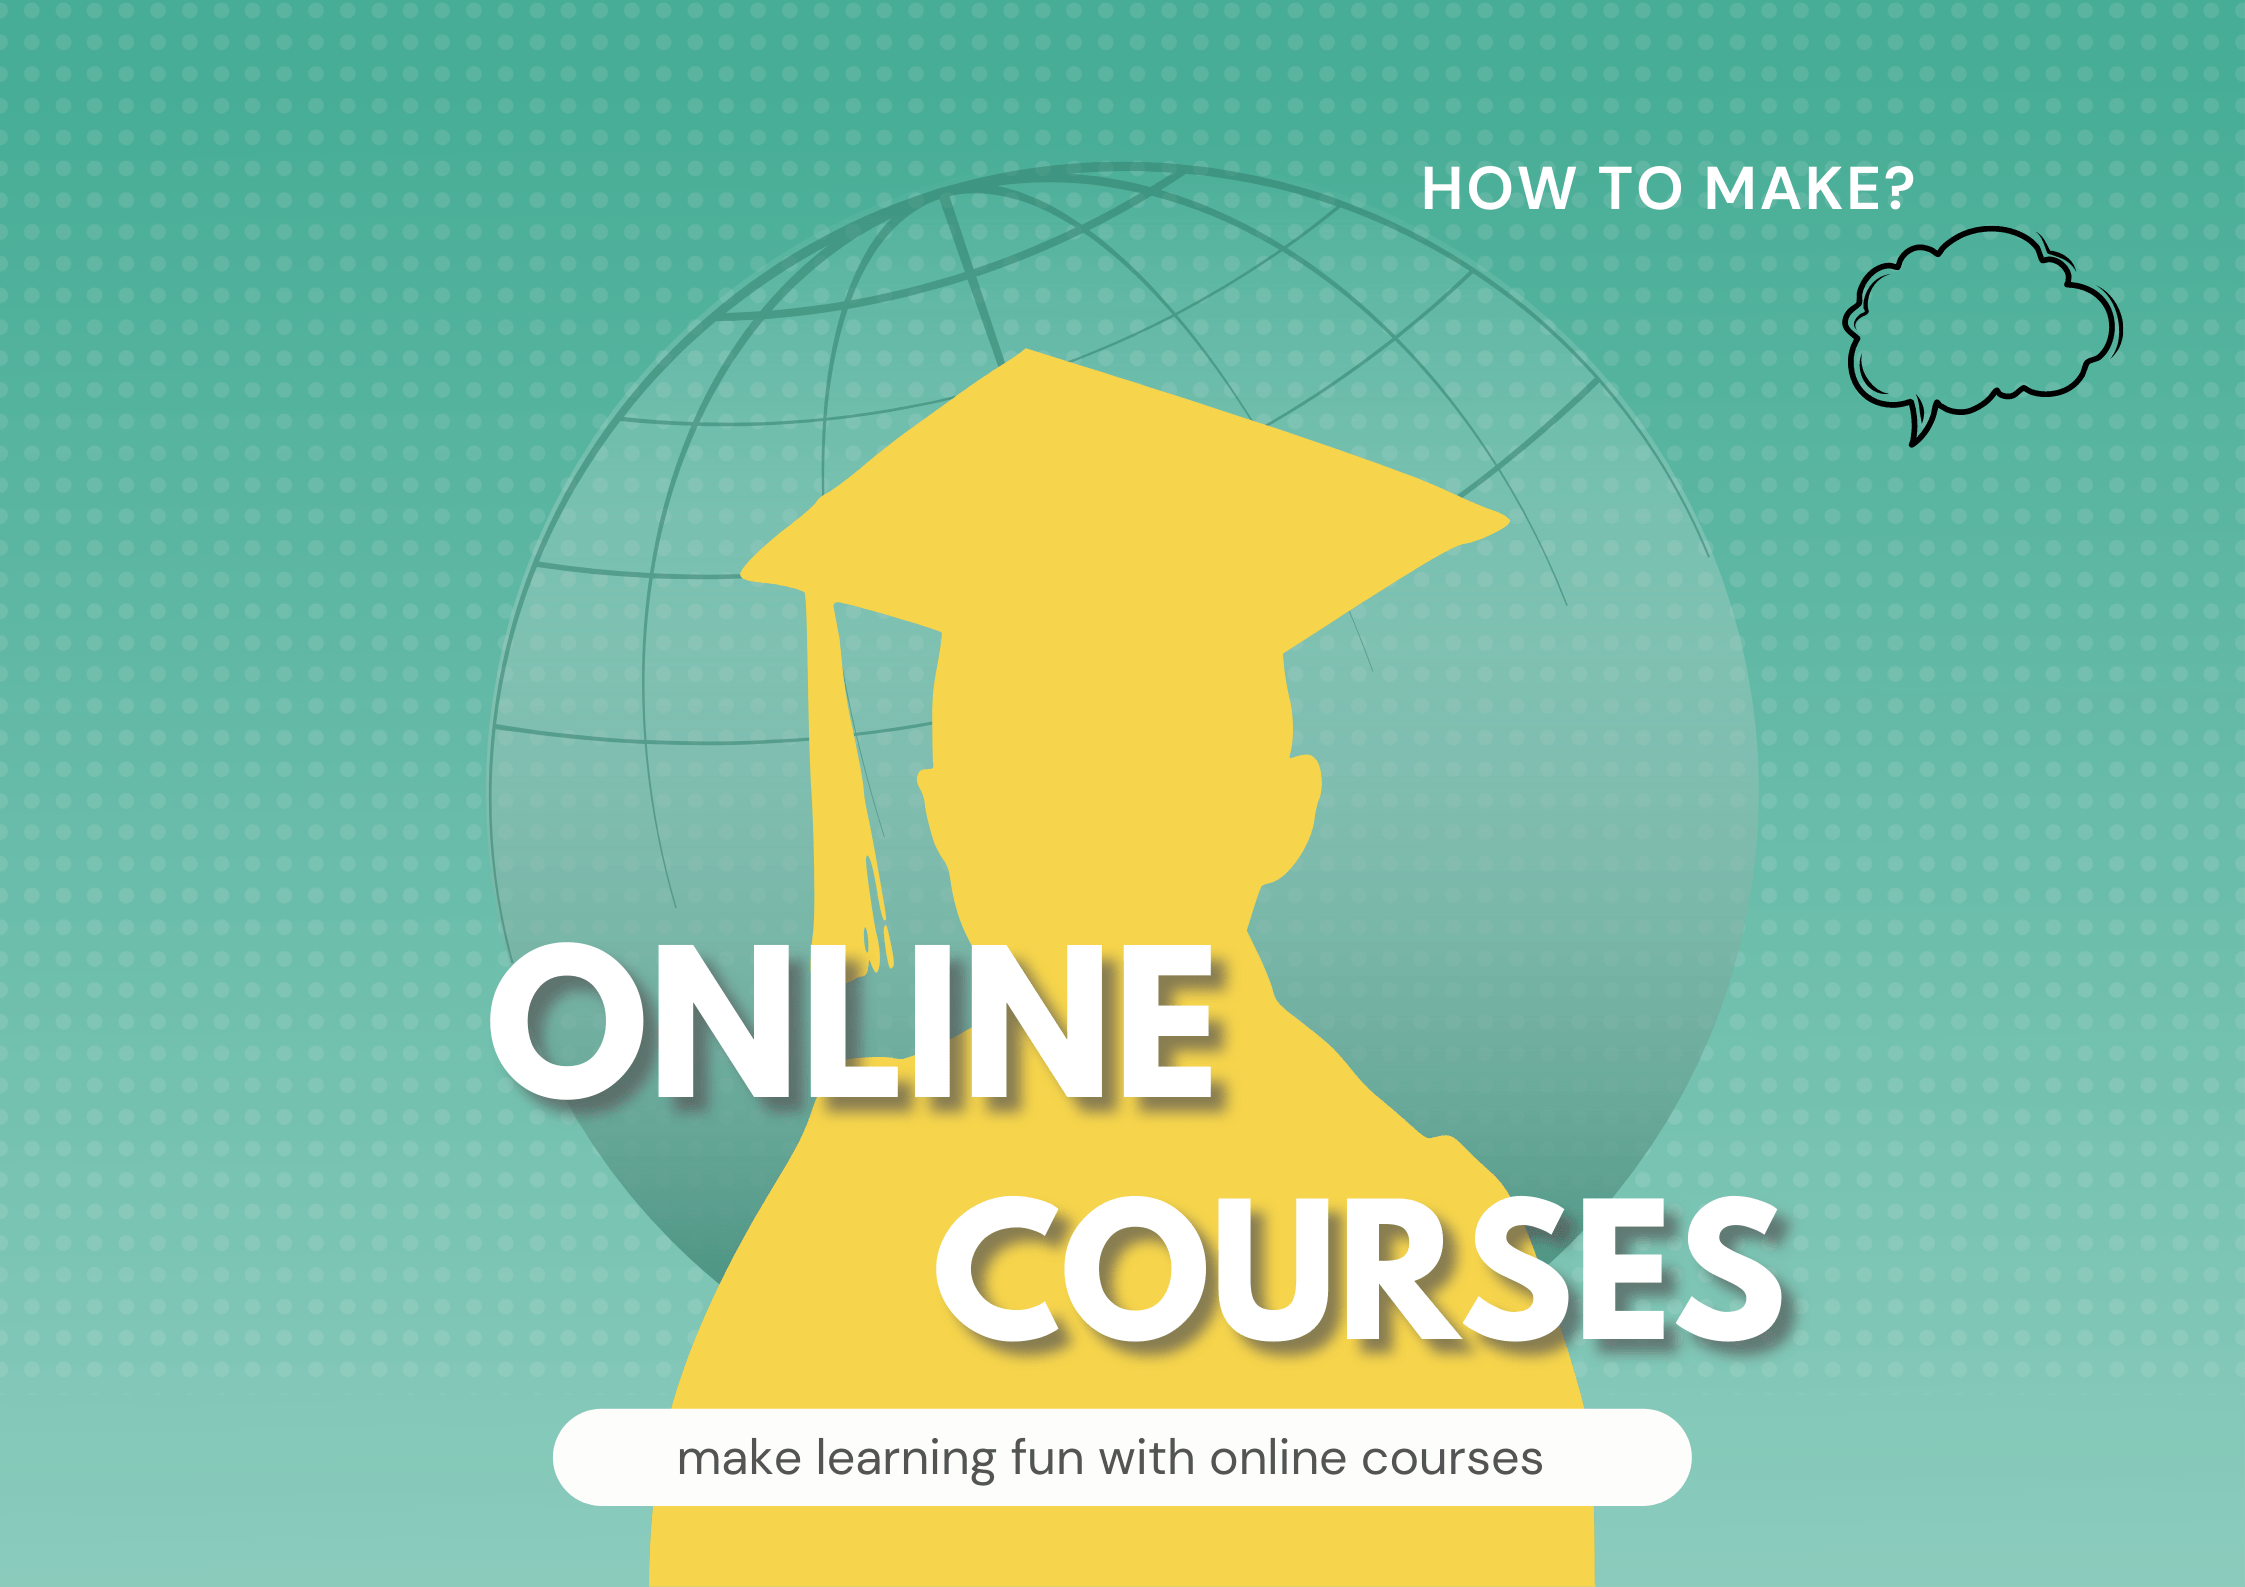 How can you make learning fun with online courses?